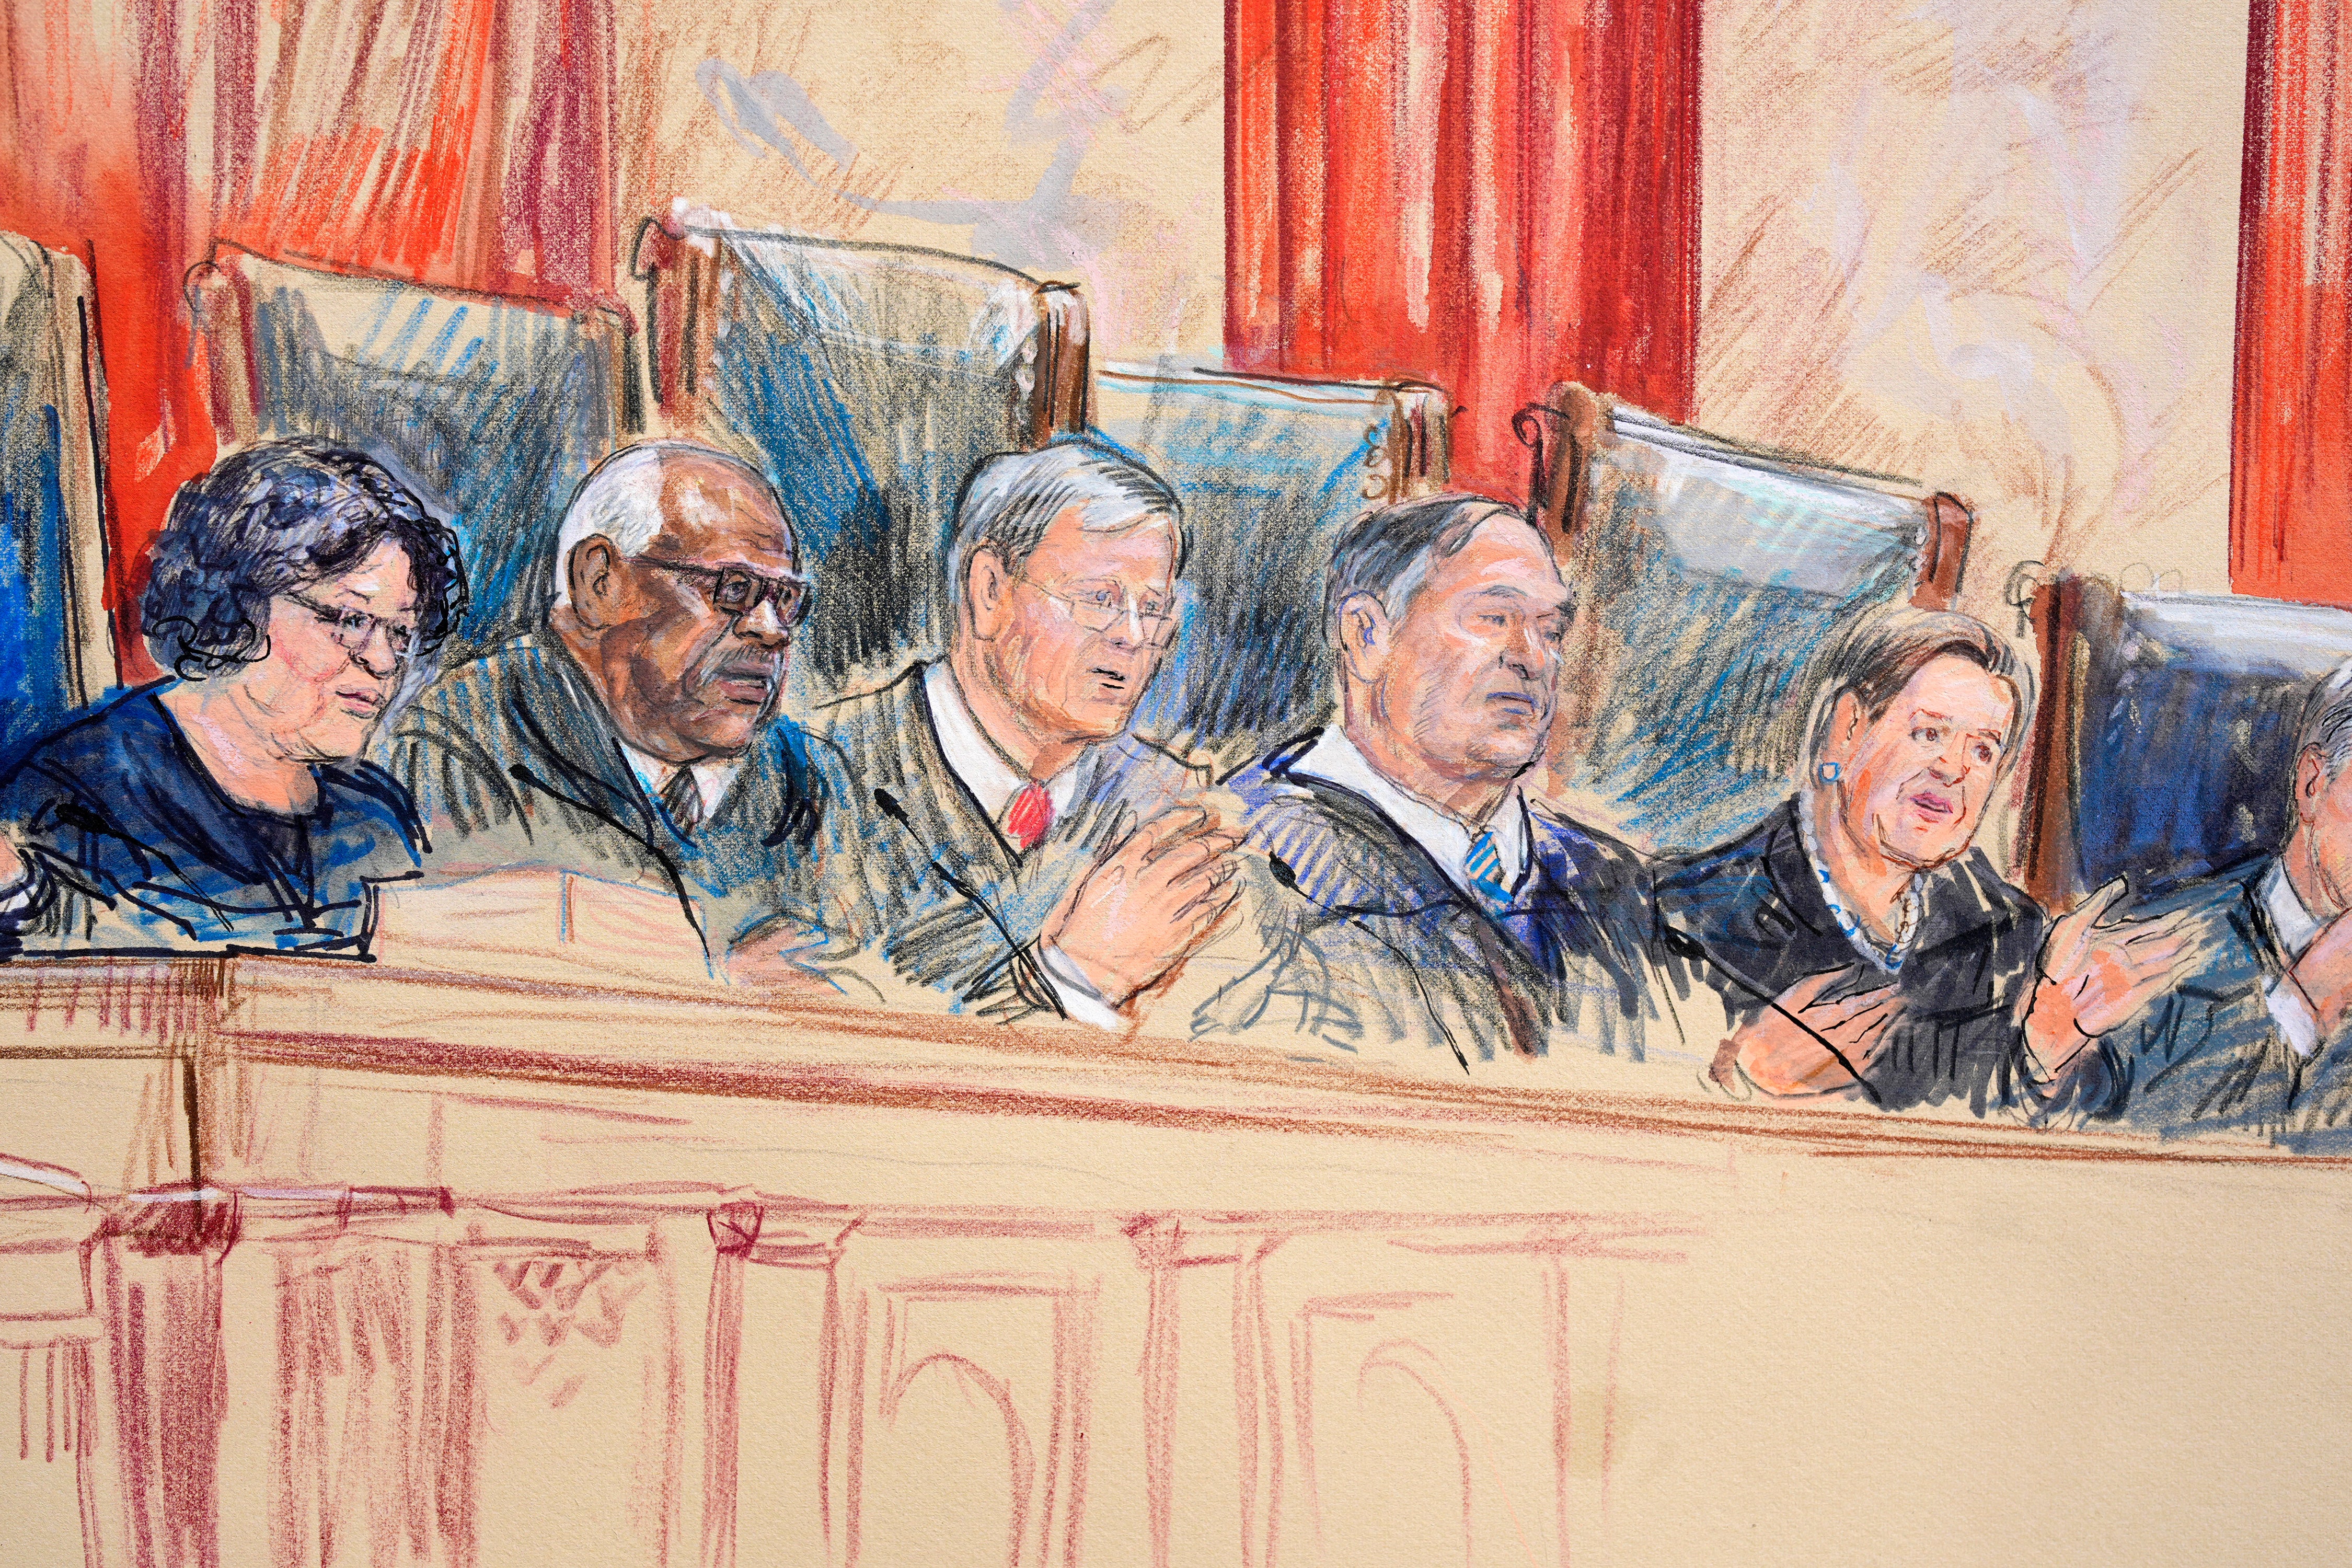 From left to right: Justices Sonia Sotomayor, Clarence Thomas, John Roberts, Samuel Alito, and Elena Kagan